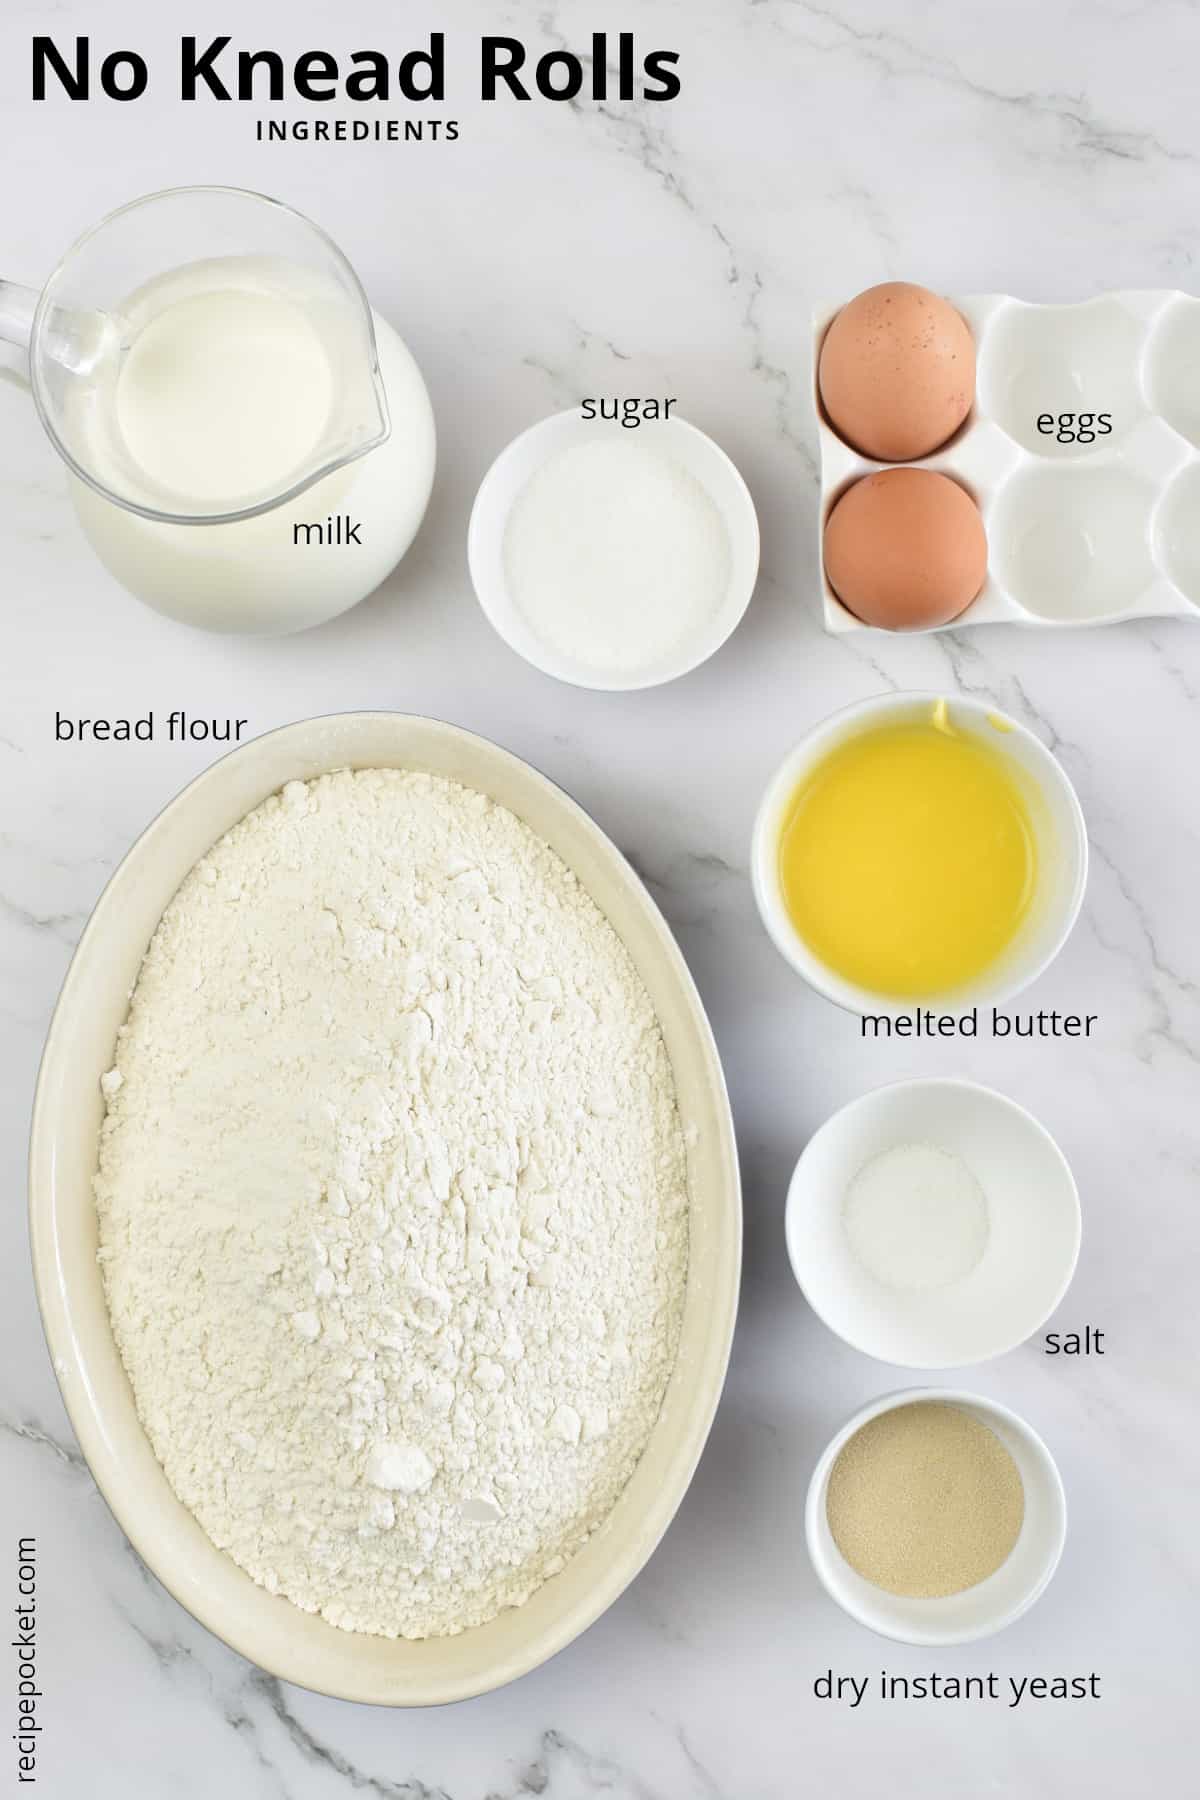 Image showing flour, butter, eggs, milk and yeast.